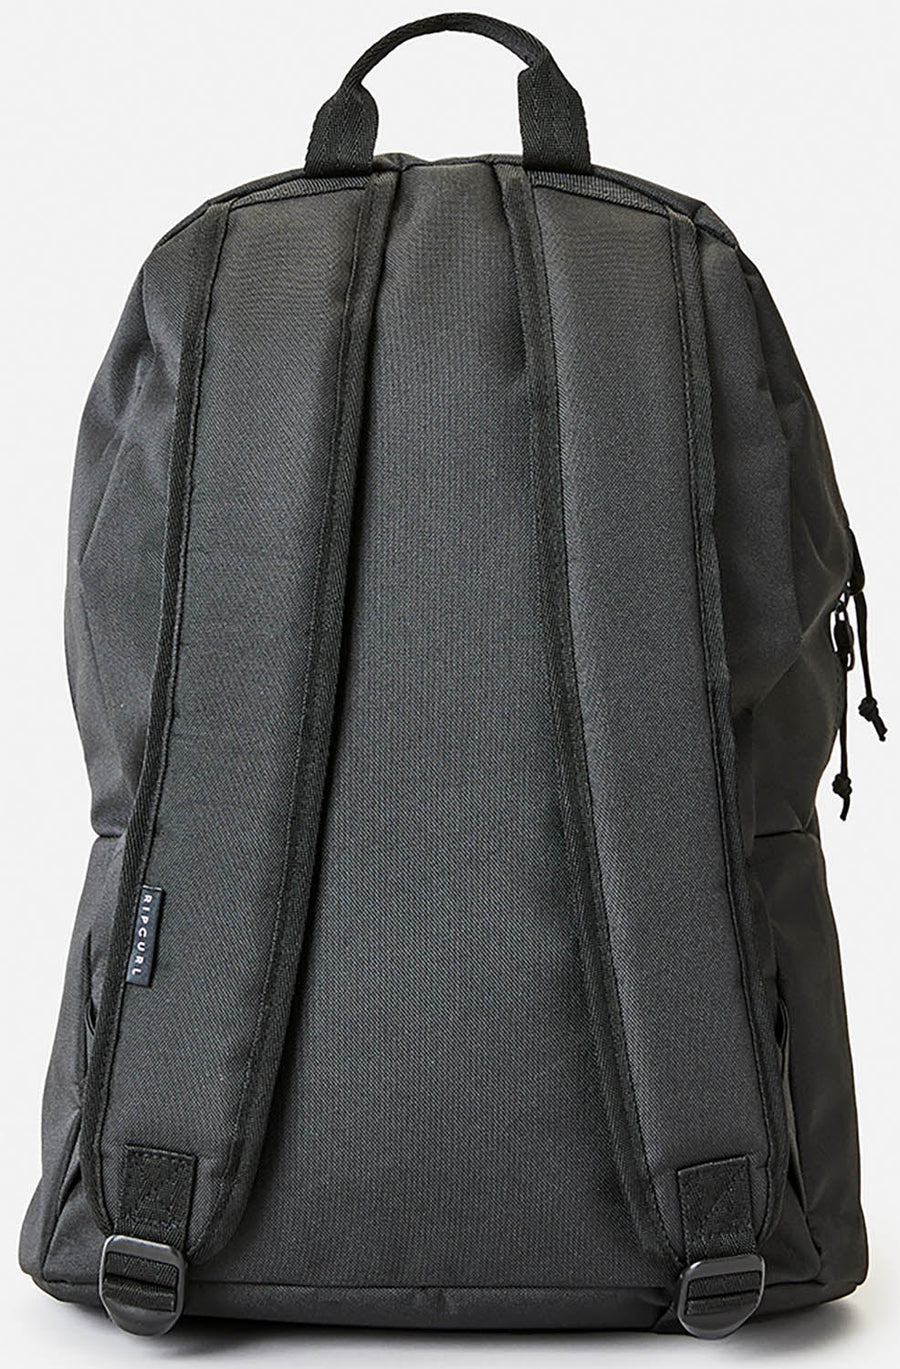 Rip Curl Dome Pro 18 L Backpack